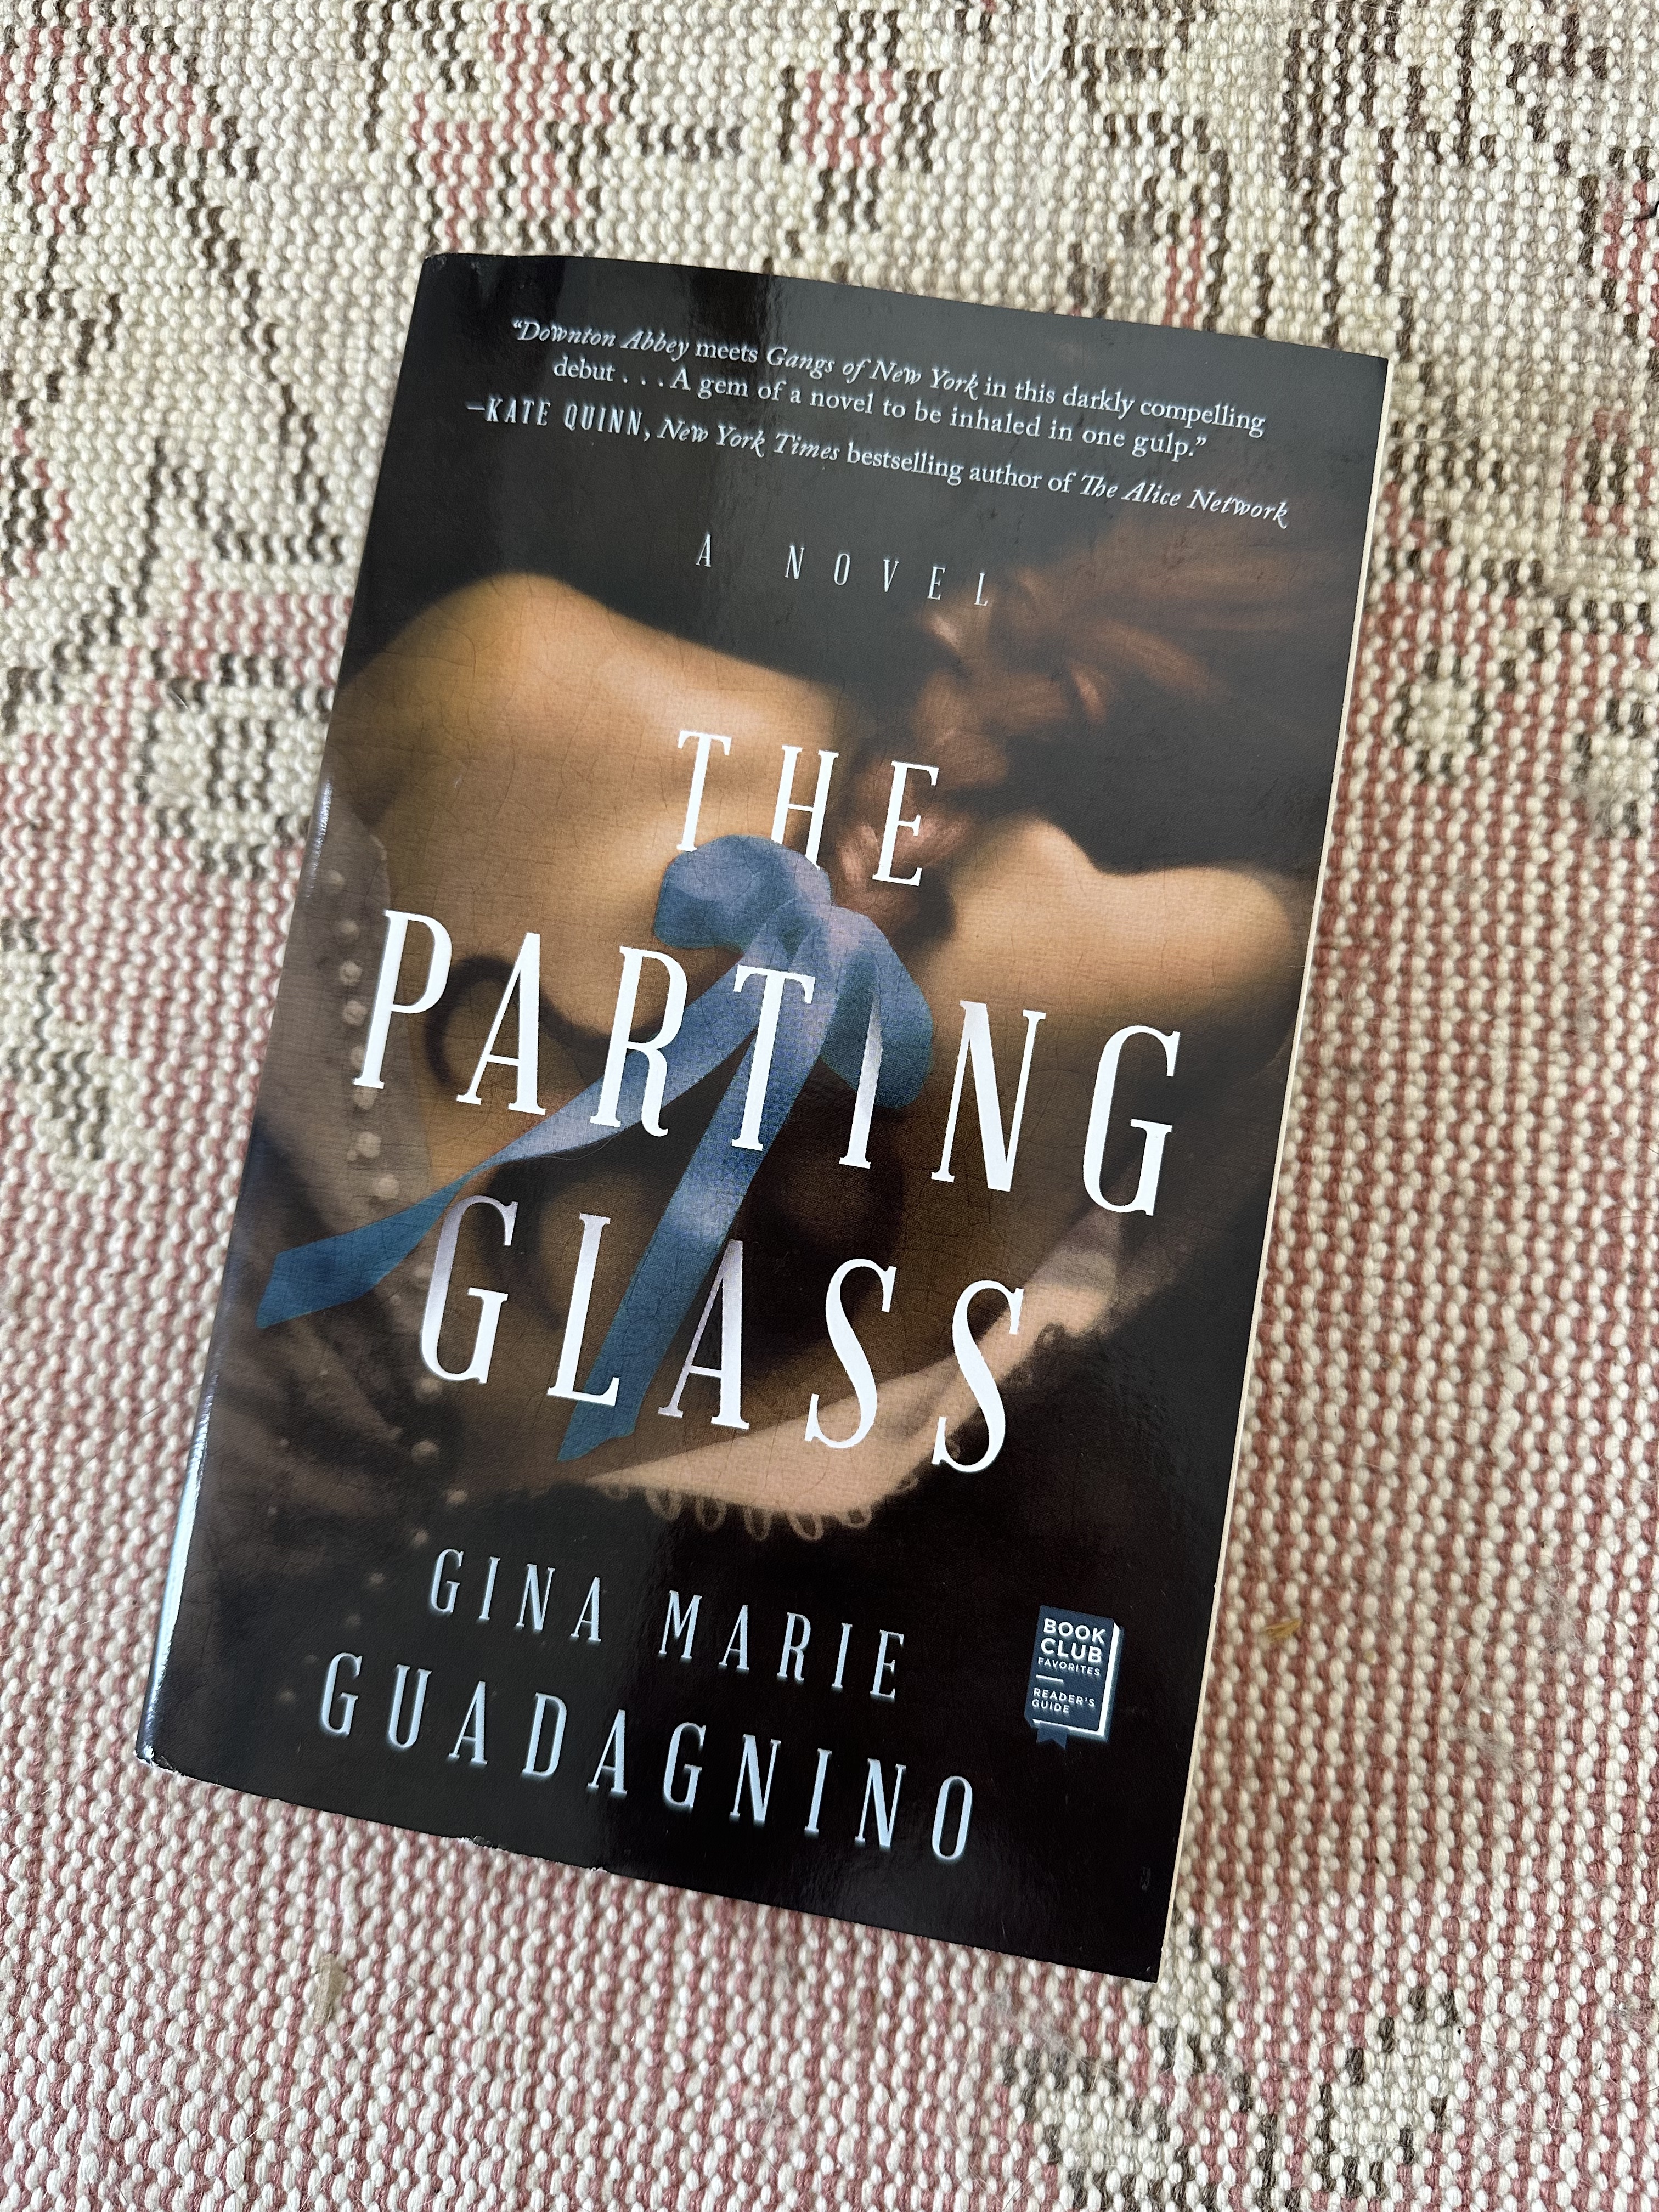 The Secret Victorianist Neo-Victorian Voices The Parting Glass, Gina Marie Guadagnino (2019) picture